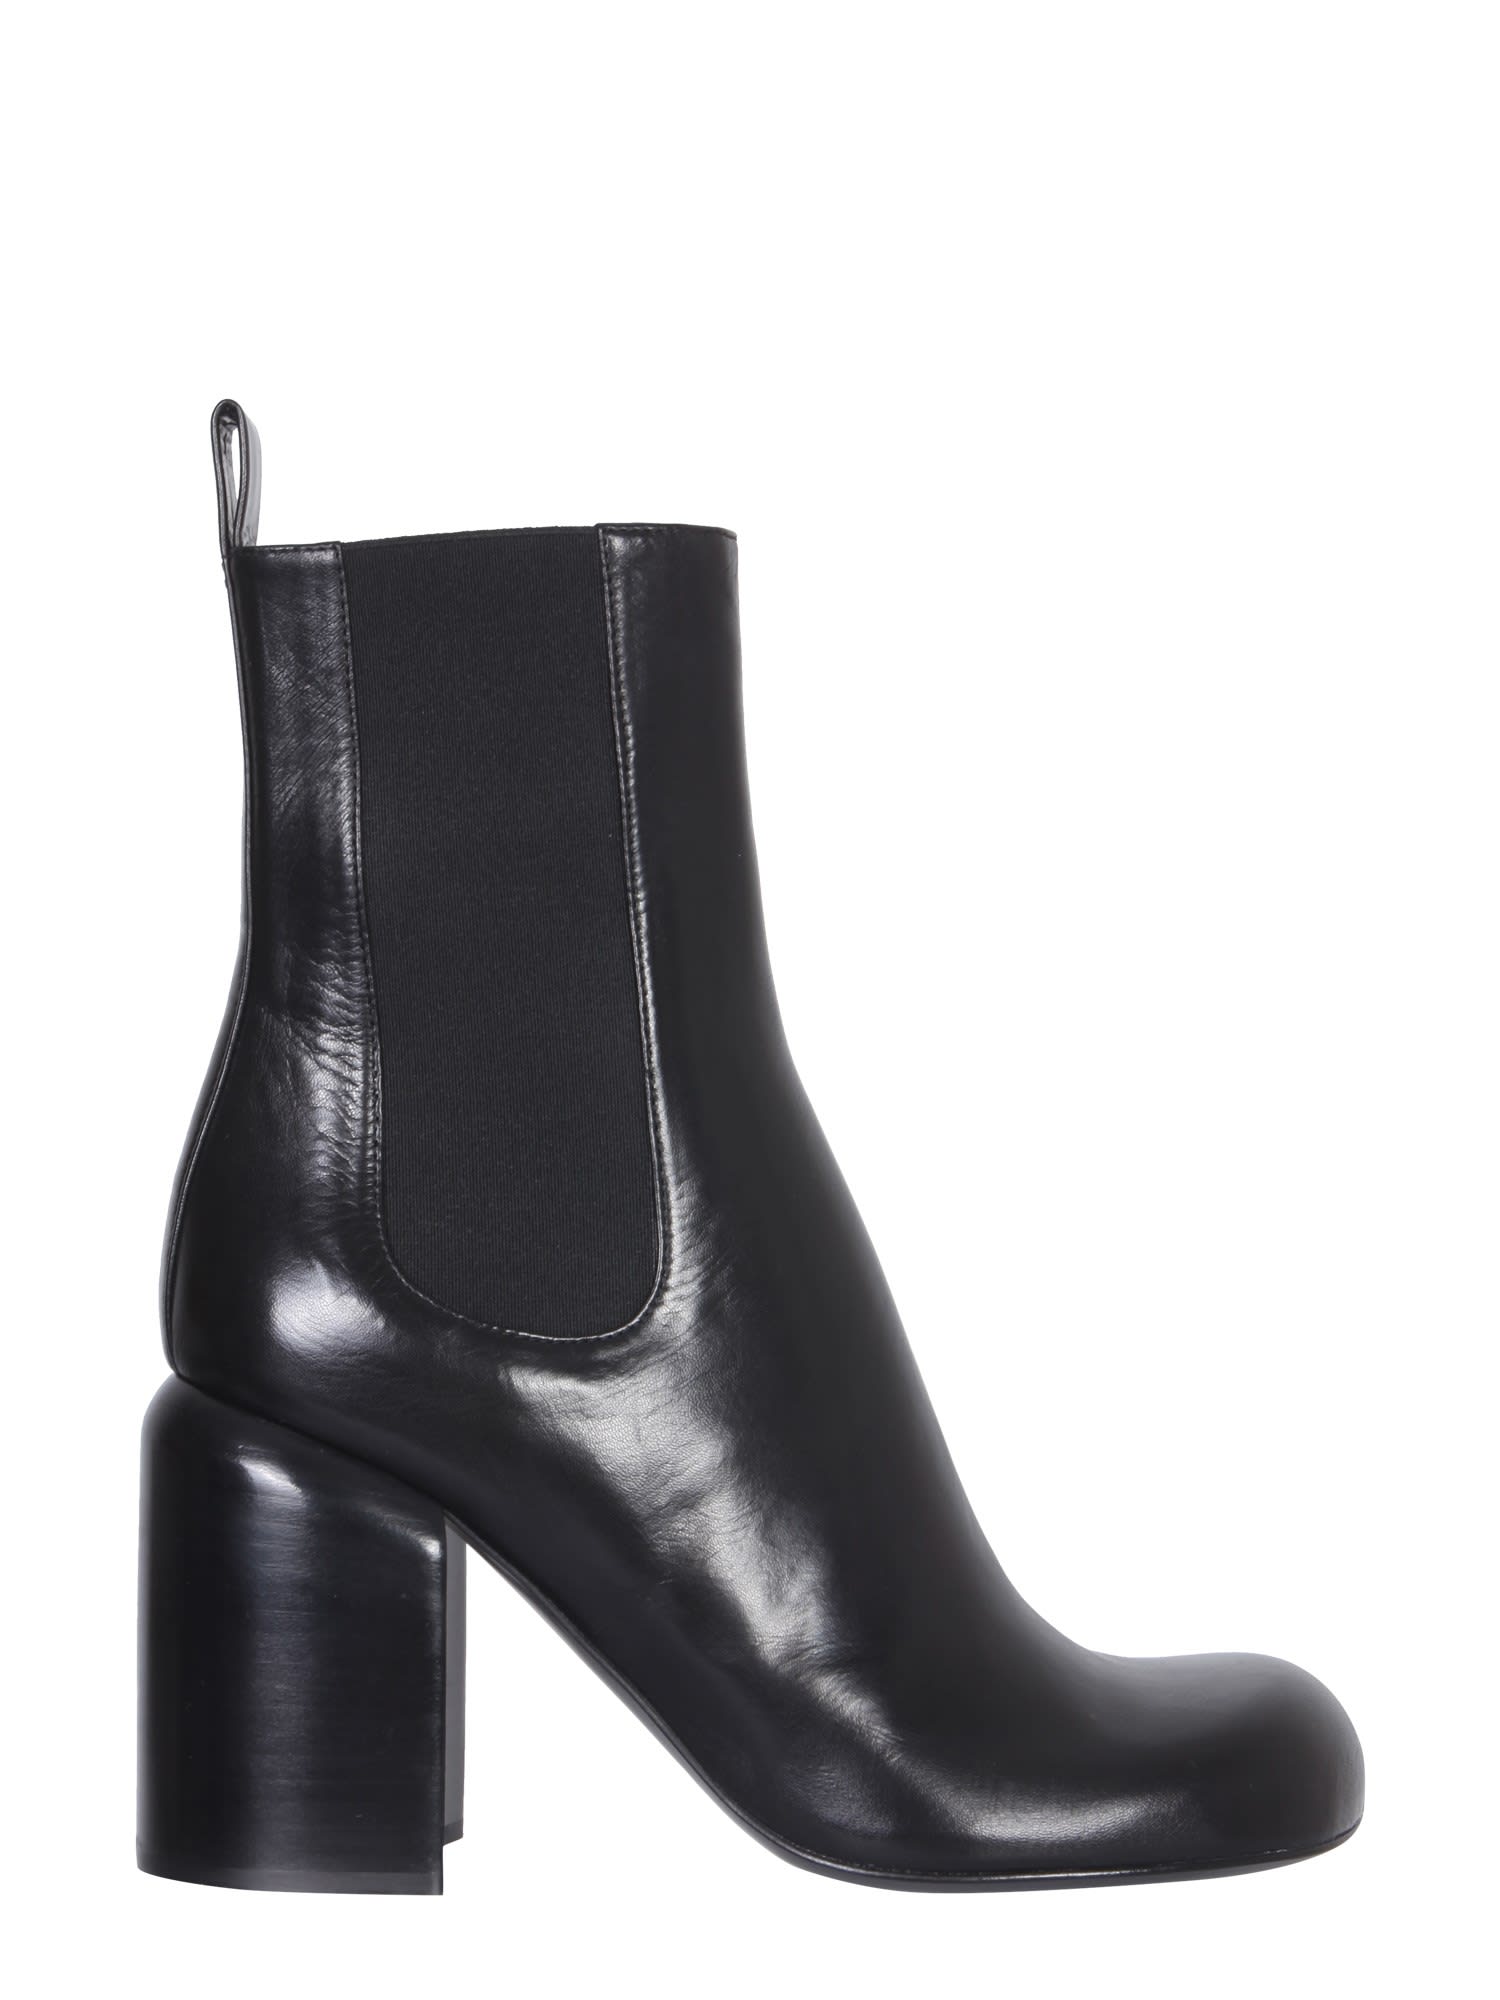 Buy Jil Sander Leather Boots online, shop Jil Sander shoes with free shipping